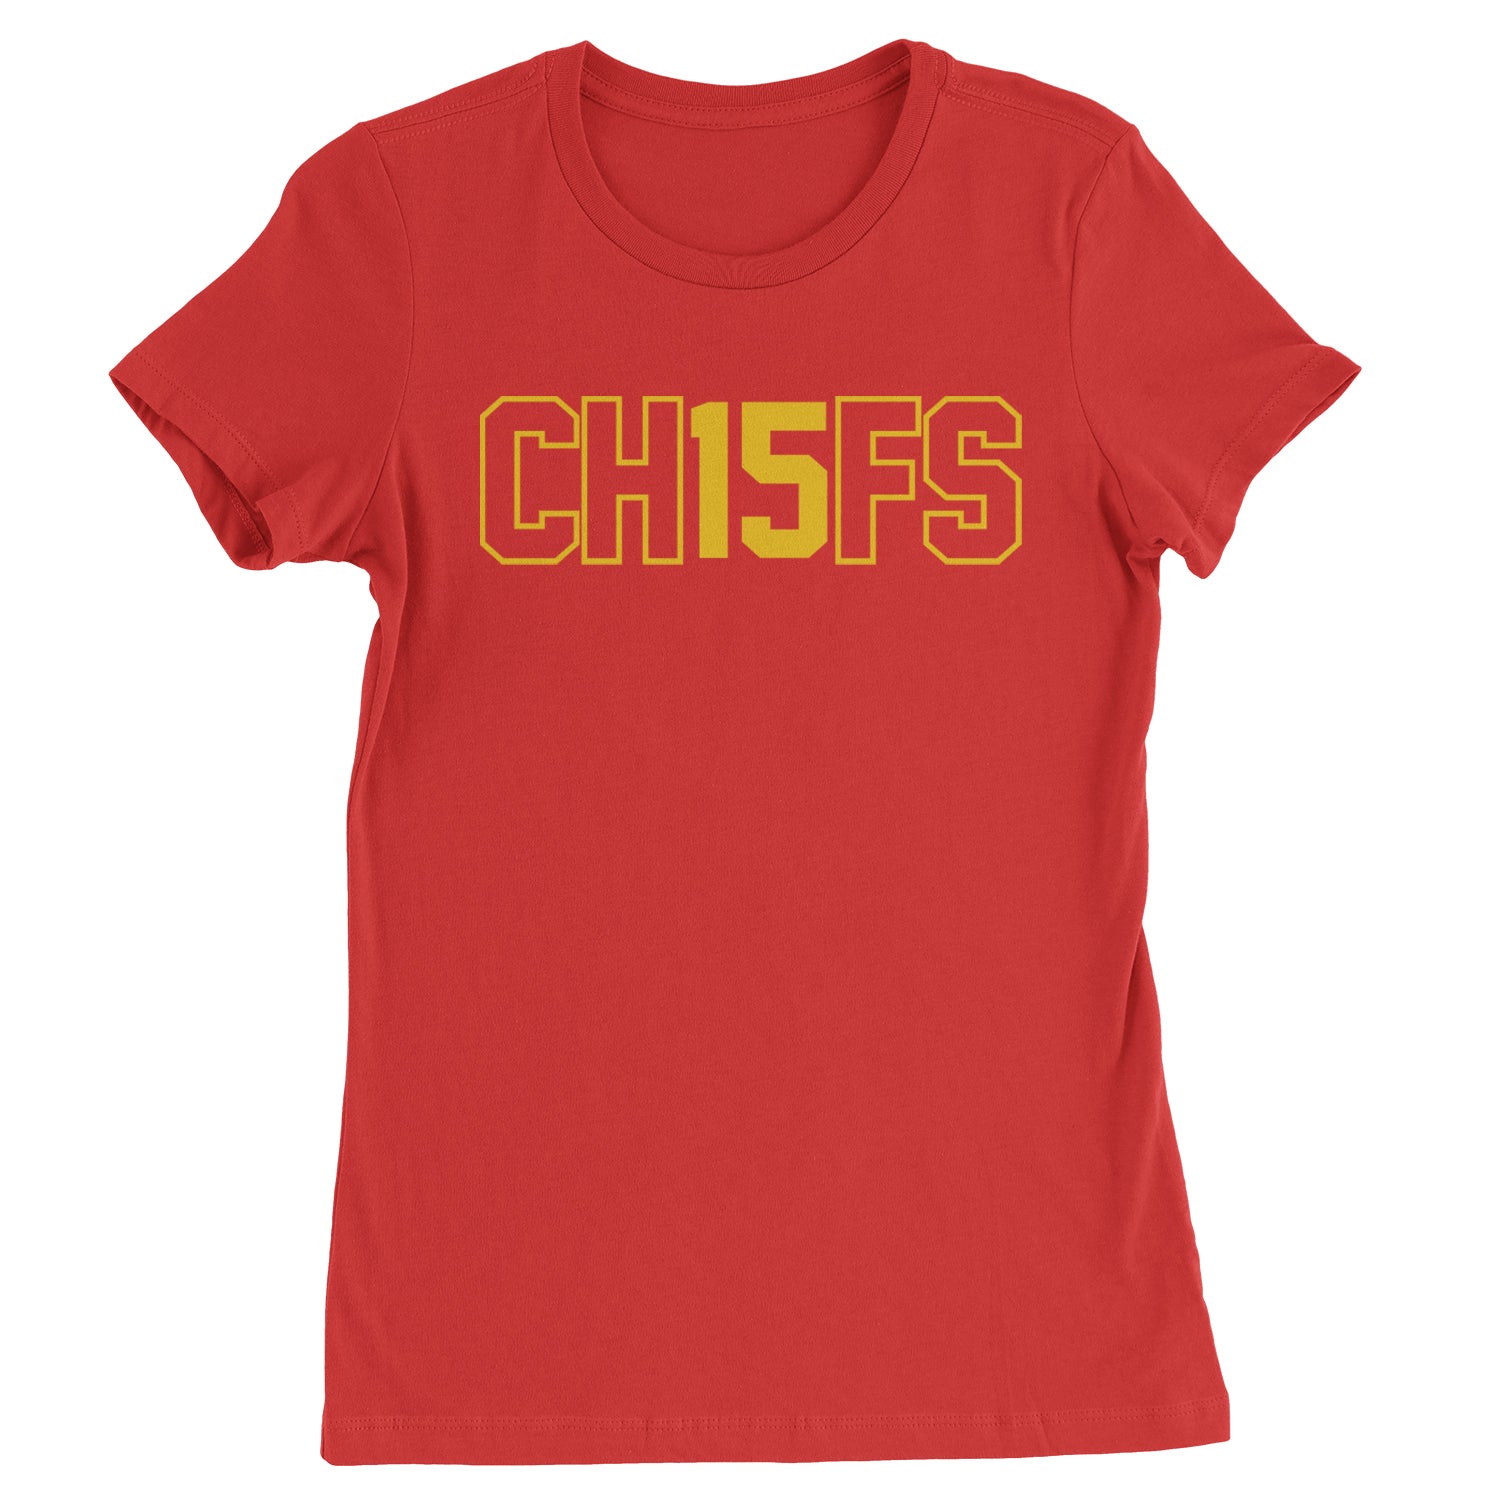 Ch15fs Chief 15 Shirt Womens T-shirt ass, big, burrowhead, game, kelce, know, moutha, my, nd, patrick, role, shut, sports, your by Expression Tees